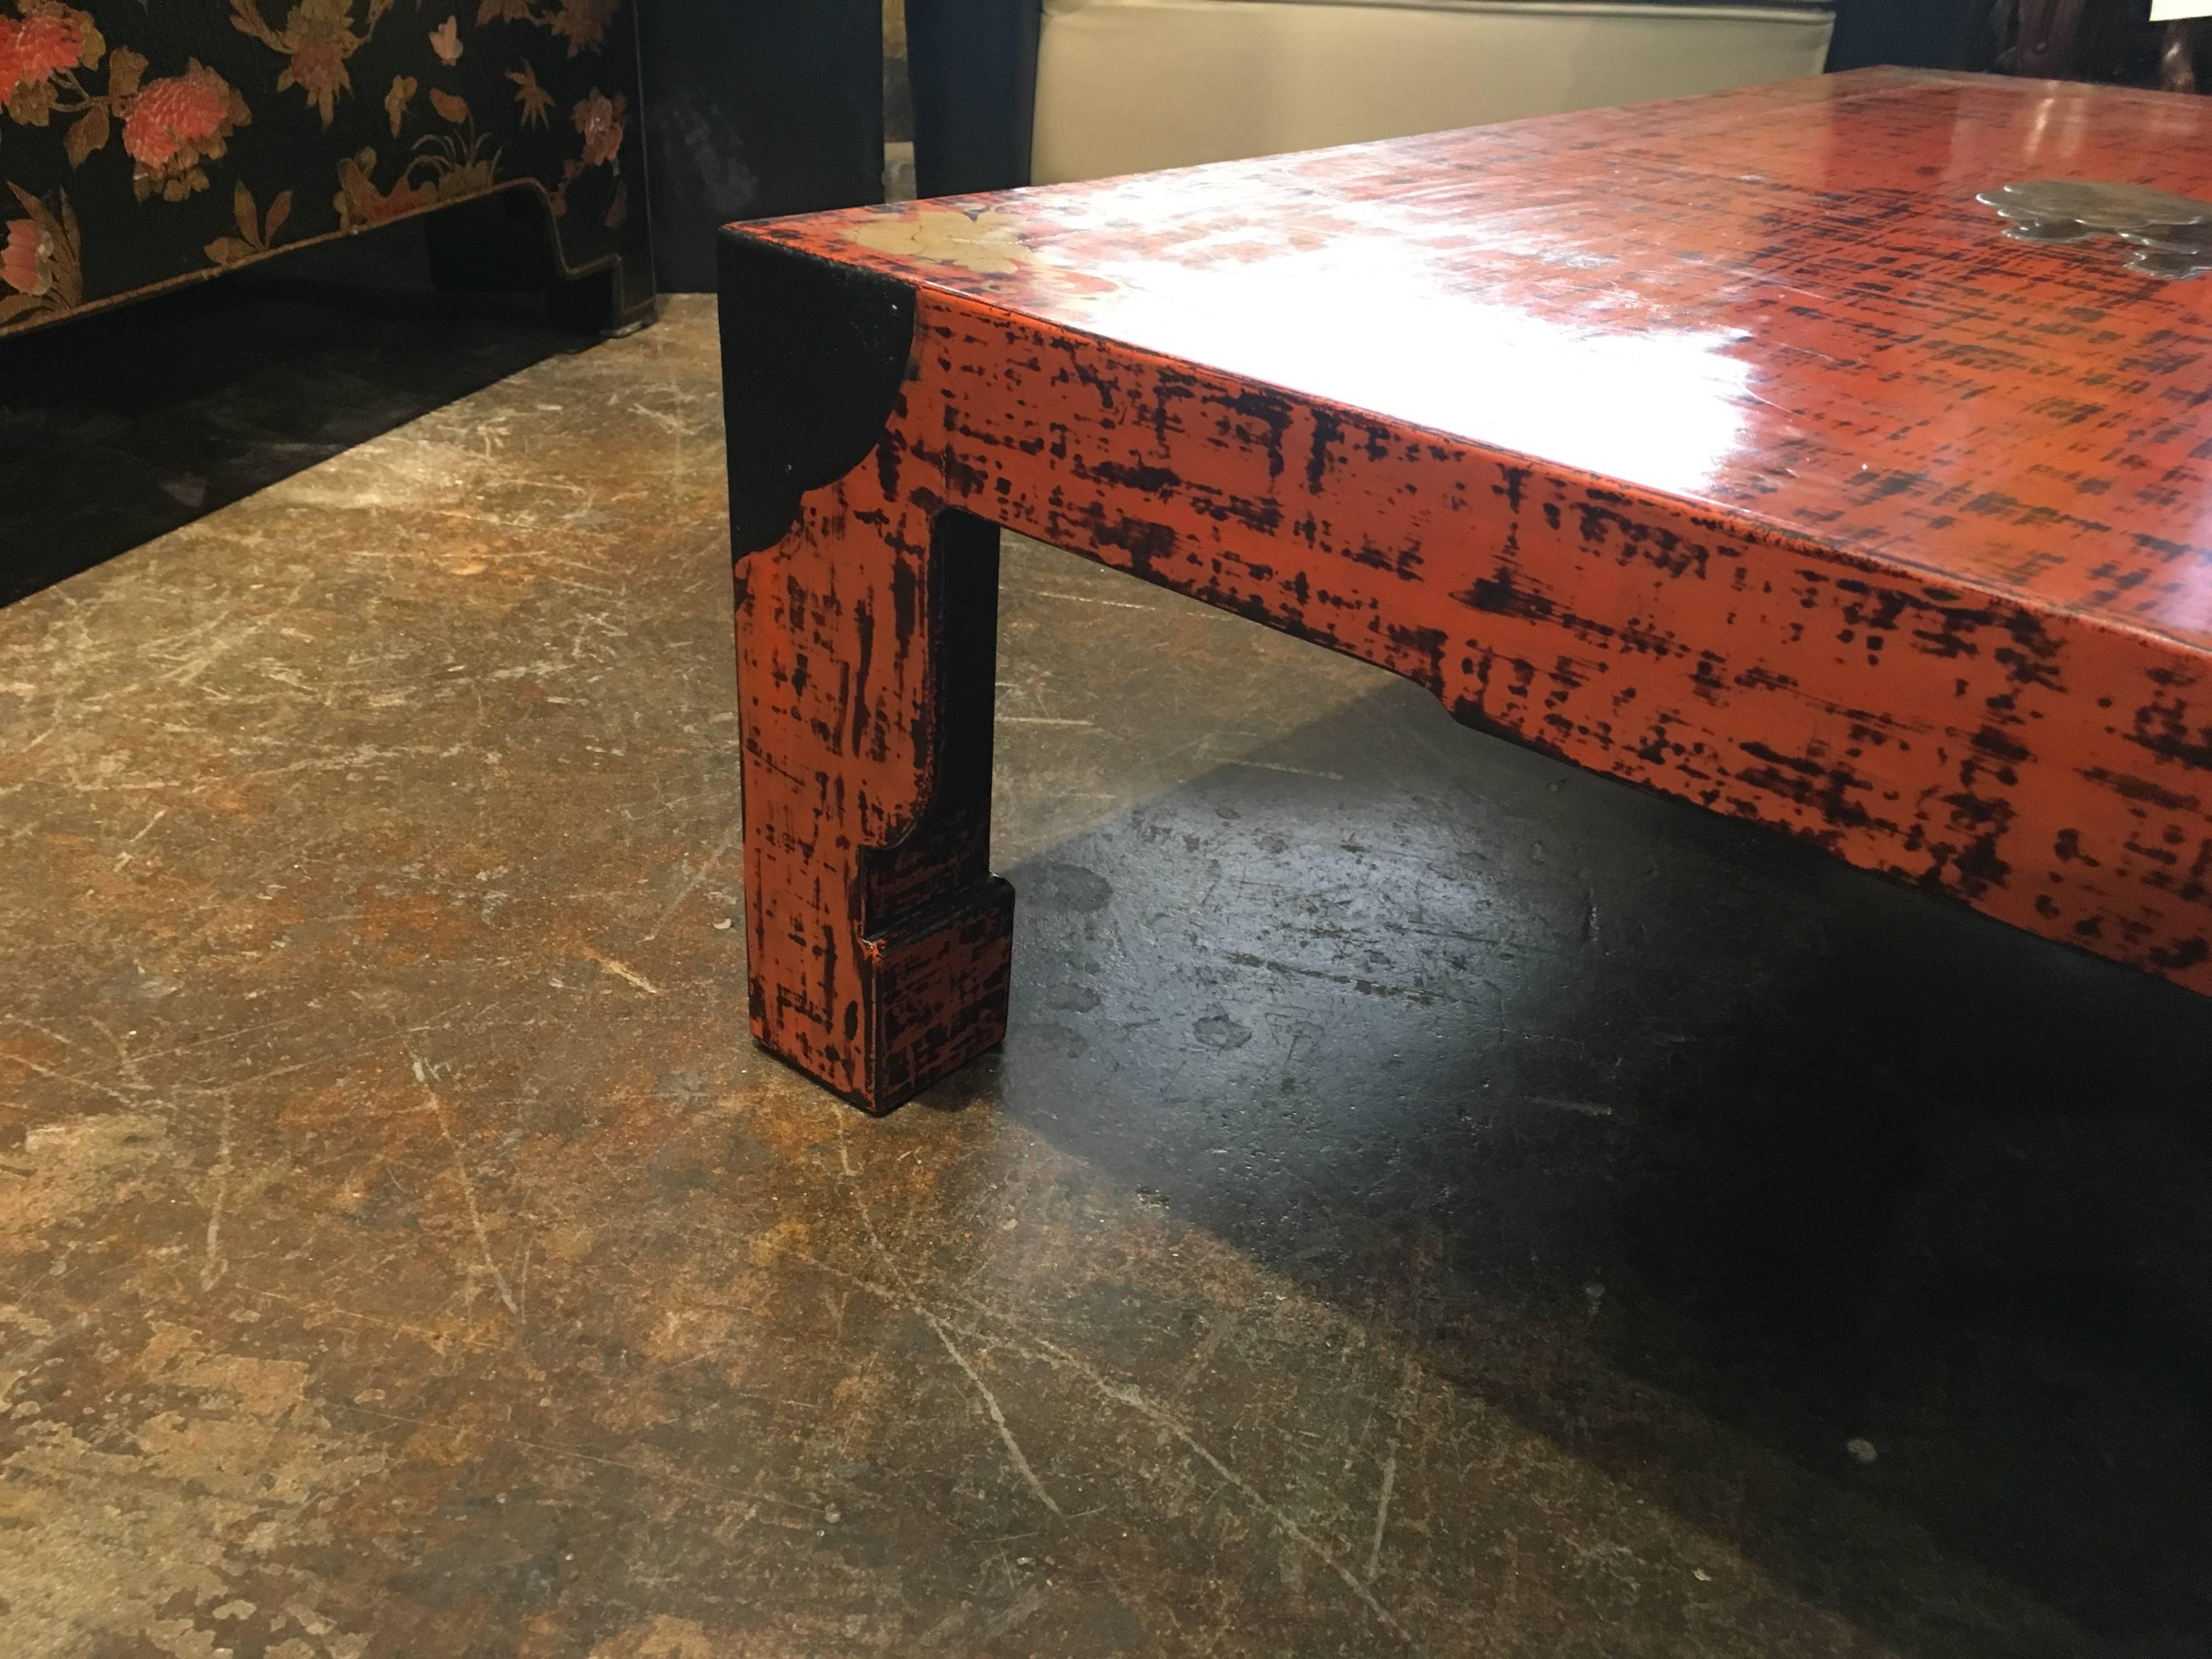 Hand-Painted Japanese Negoro Lacquer Low Table with Shishi Design, Dated 1928